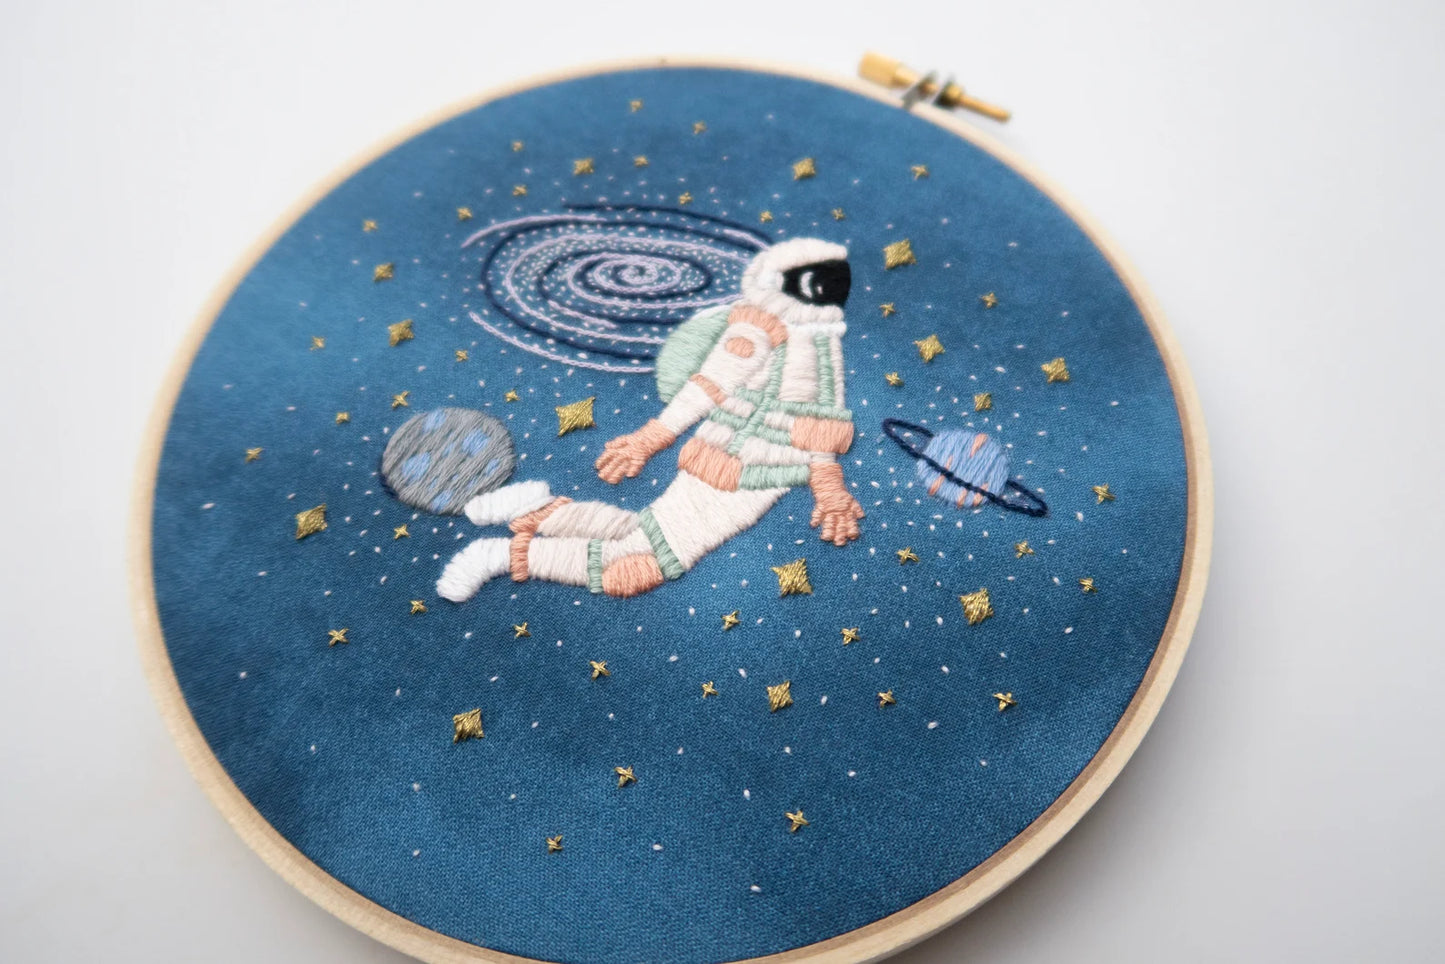 Blush astronaut in outer space hand embroidery kit for outer space nursery or decor with planets and stars